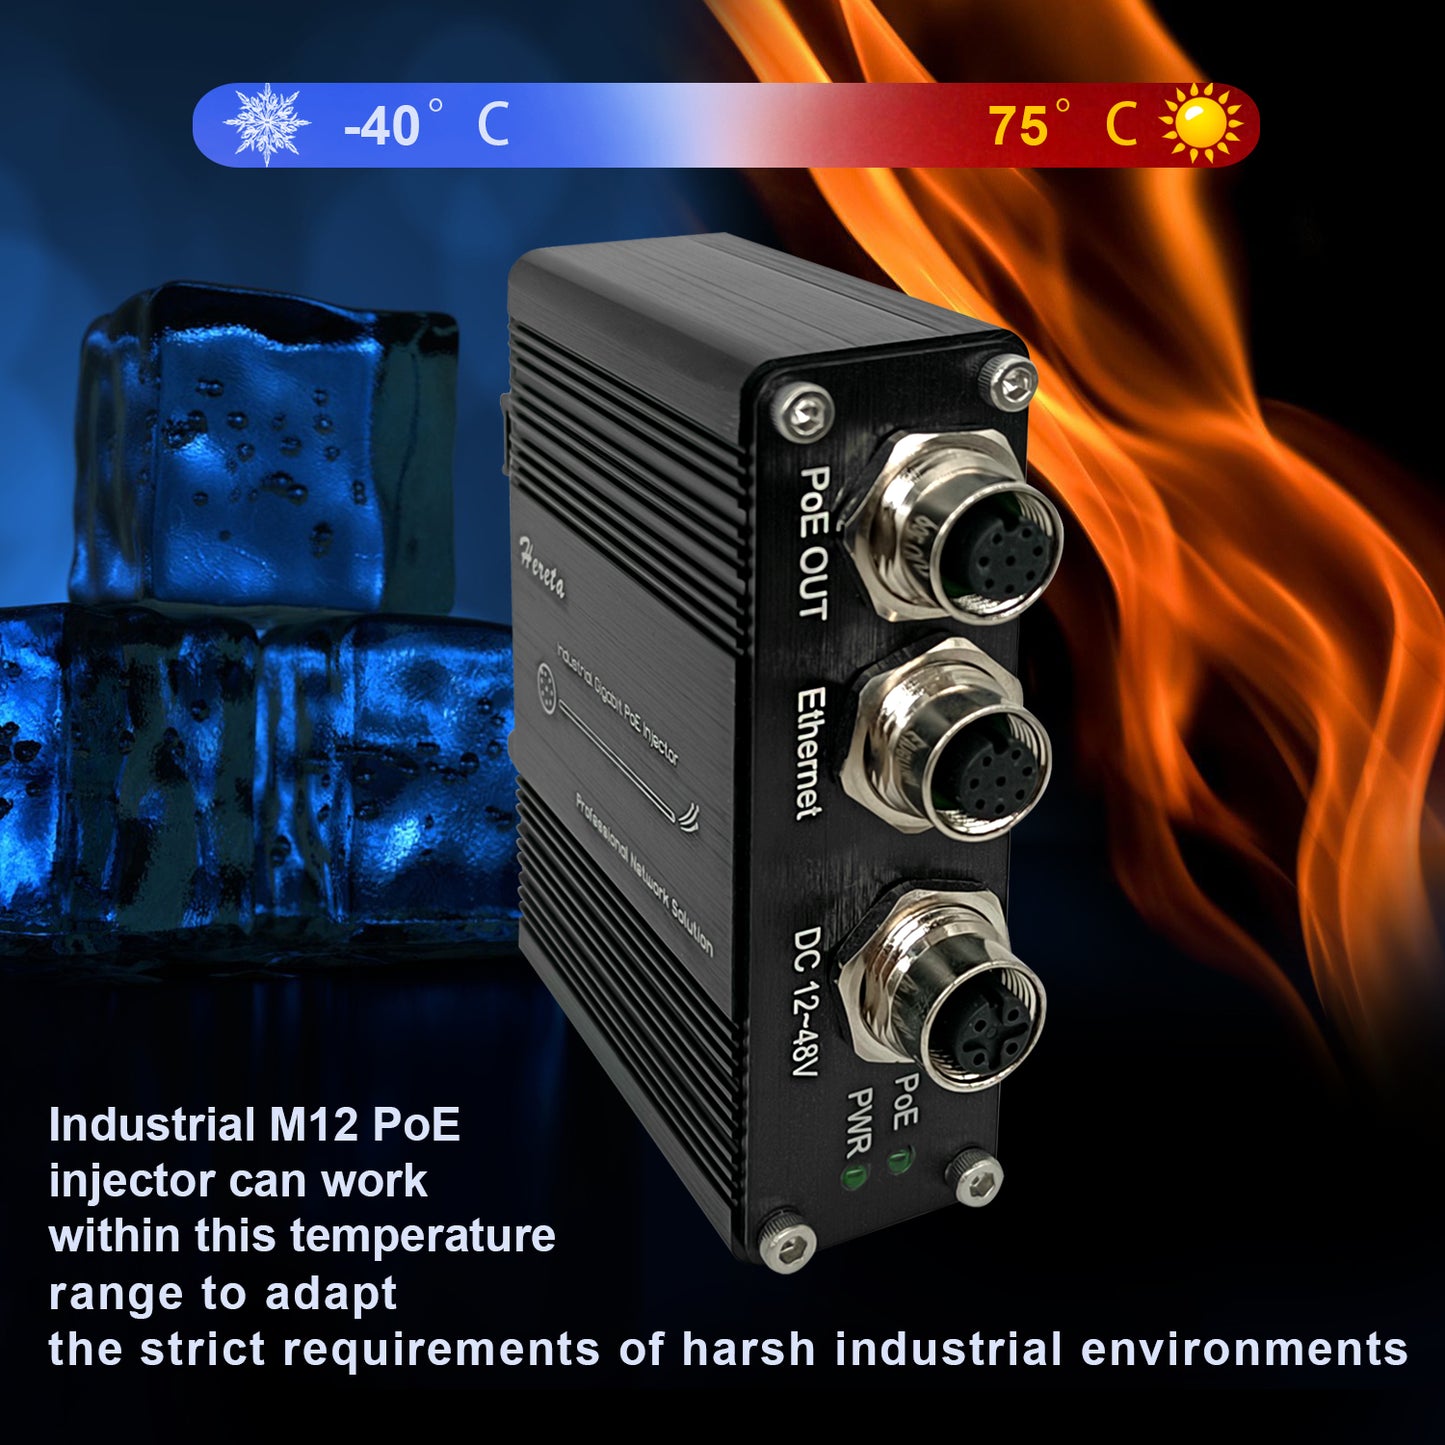 Hardened M12 Industrial Gigabit PoE+ Injector Waterproof IP68 Interface 12-48VDC Input Support The PoE IEEE 802.3 af/at 30W Power Sourcing Equipment